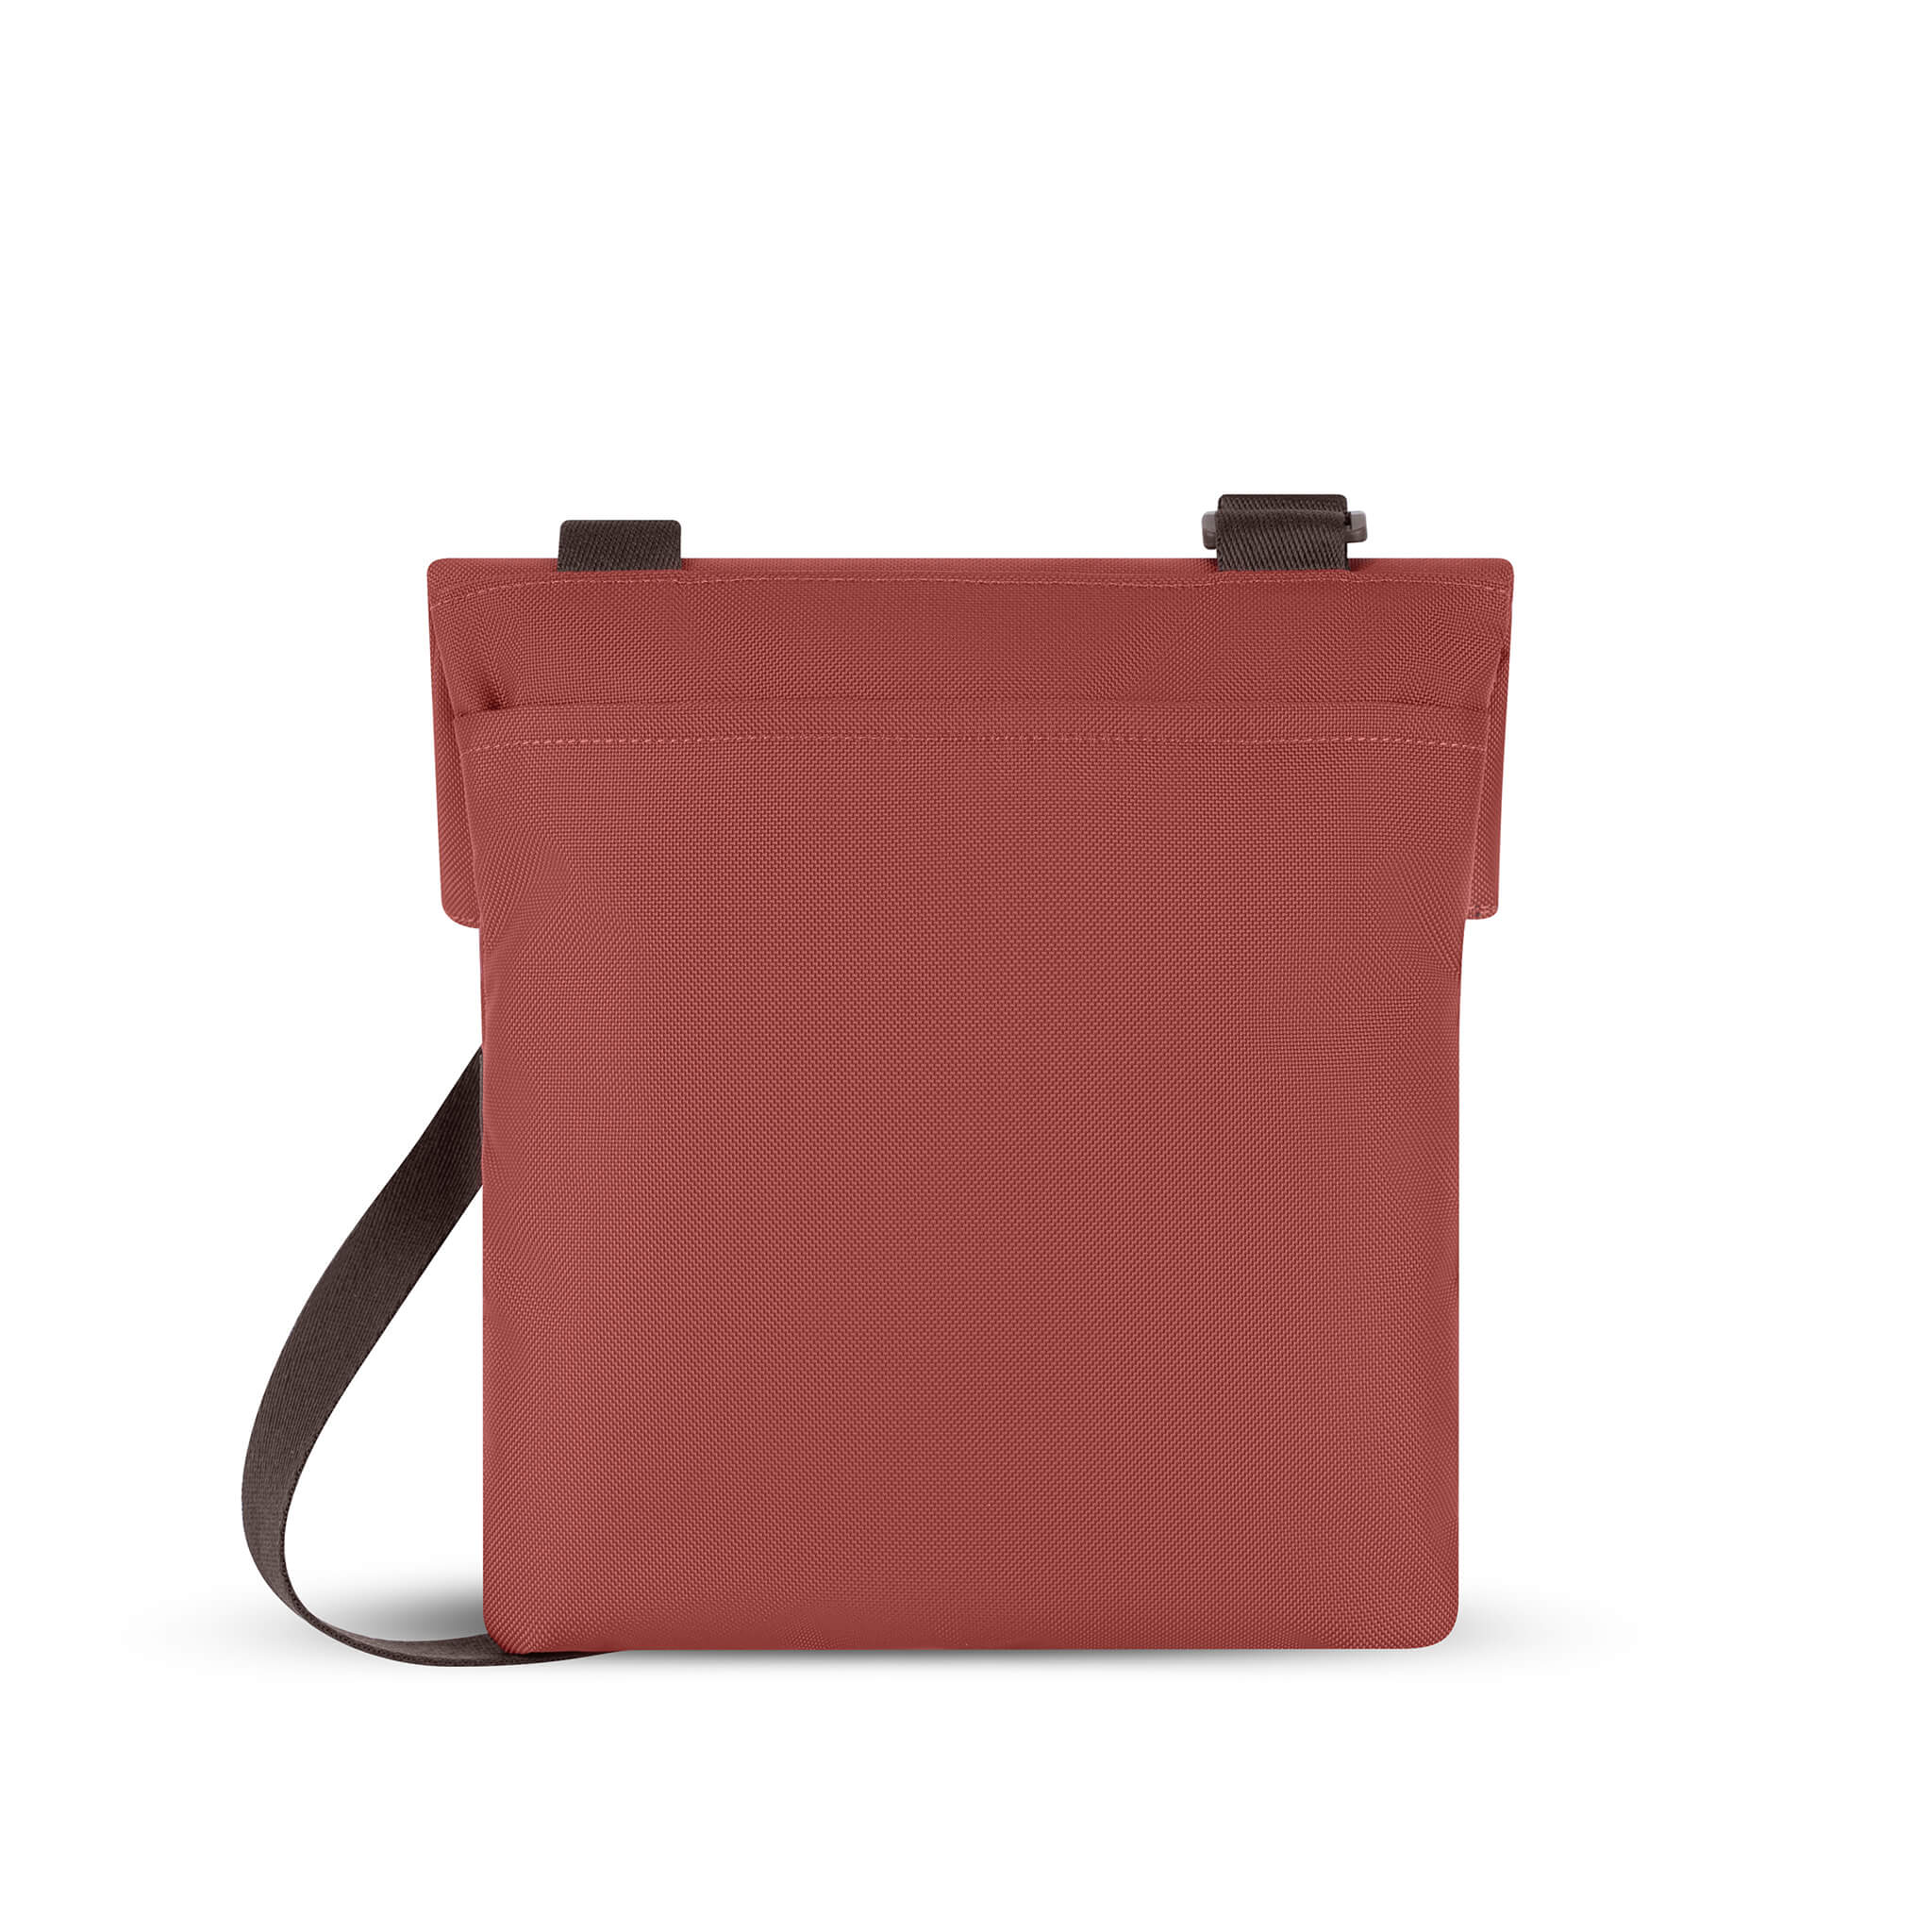 Back view of Sherpani fold over crossbody bag, the Pica in Cider. Pica features include an adjustable crossbody strap, outside zipper pocket, back flap pocket, inside zipper pocket and slip pocket, detachable keychain and RFID protection. The Cider color is two-toned in burgundy and dark brown with Sherpani logo (edelweiss flower) accented in white. 